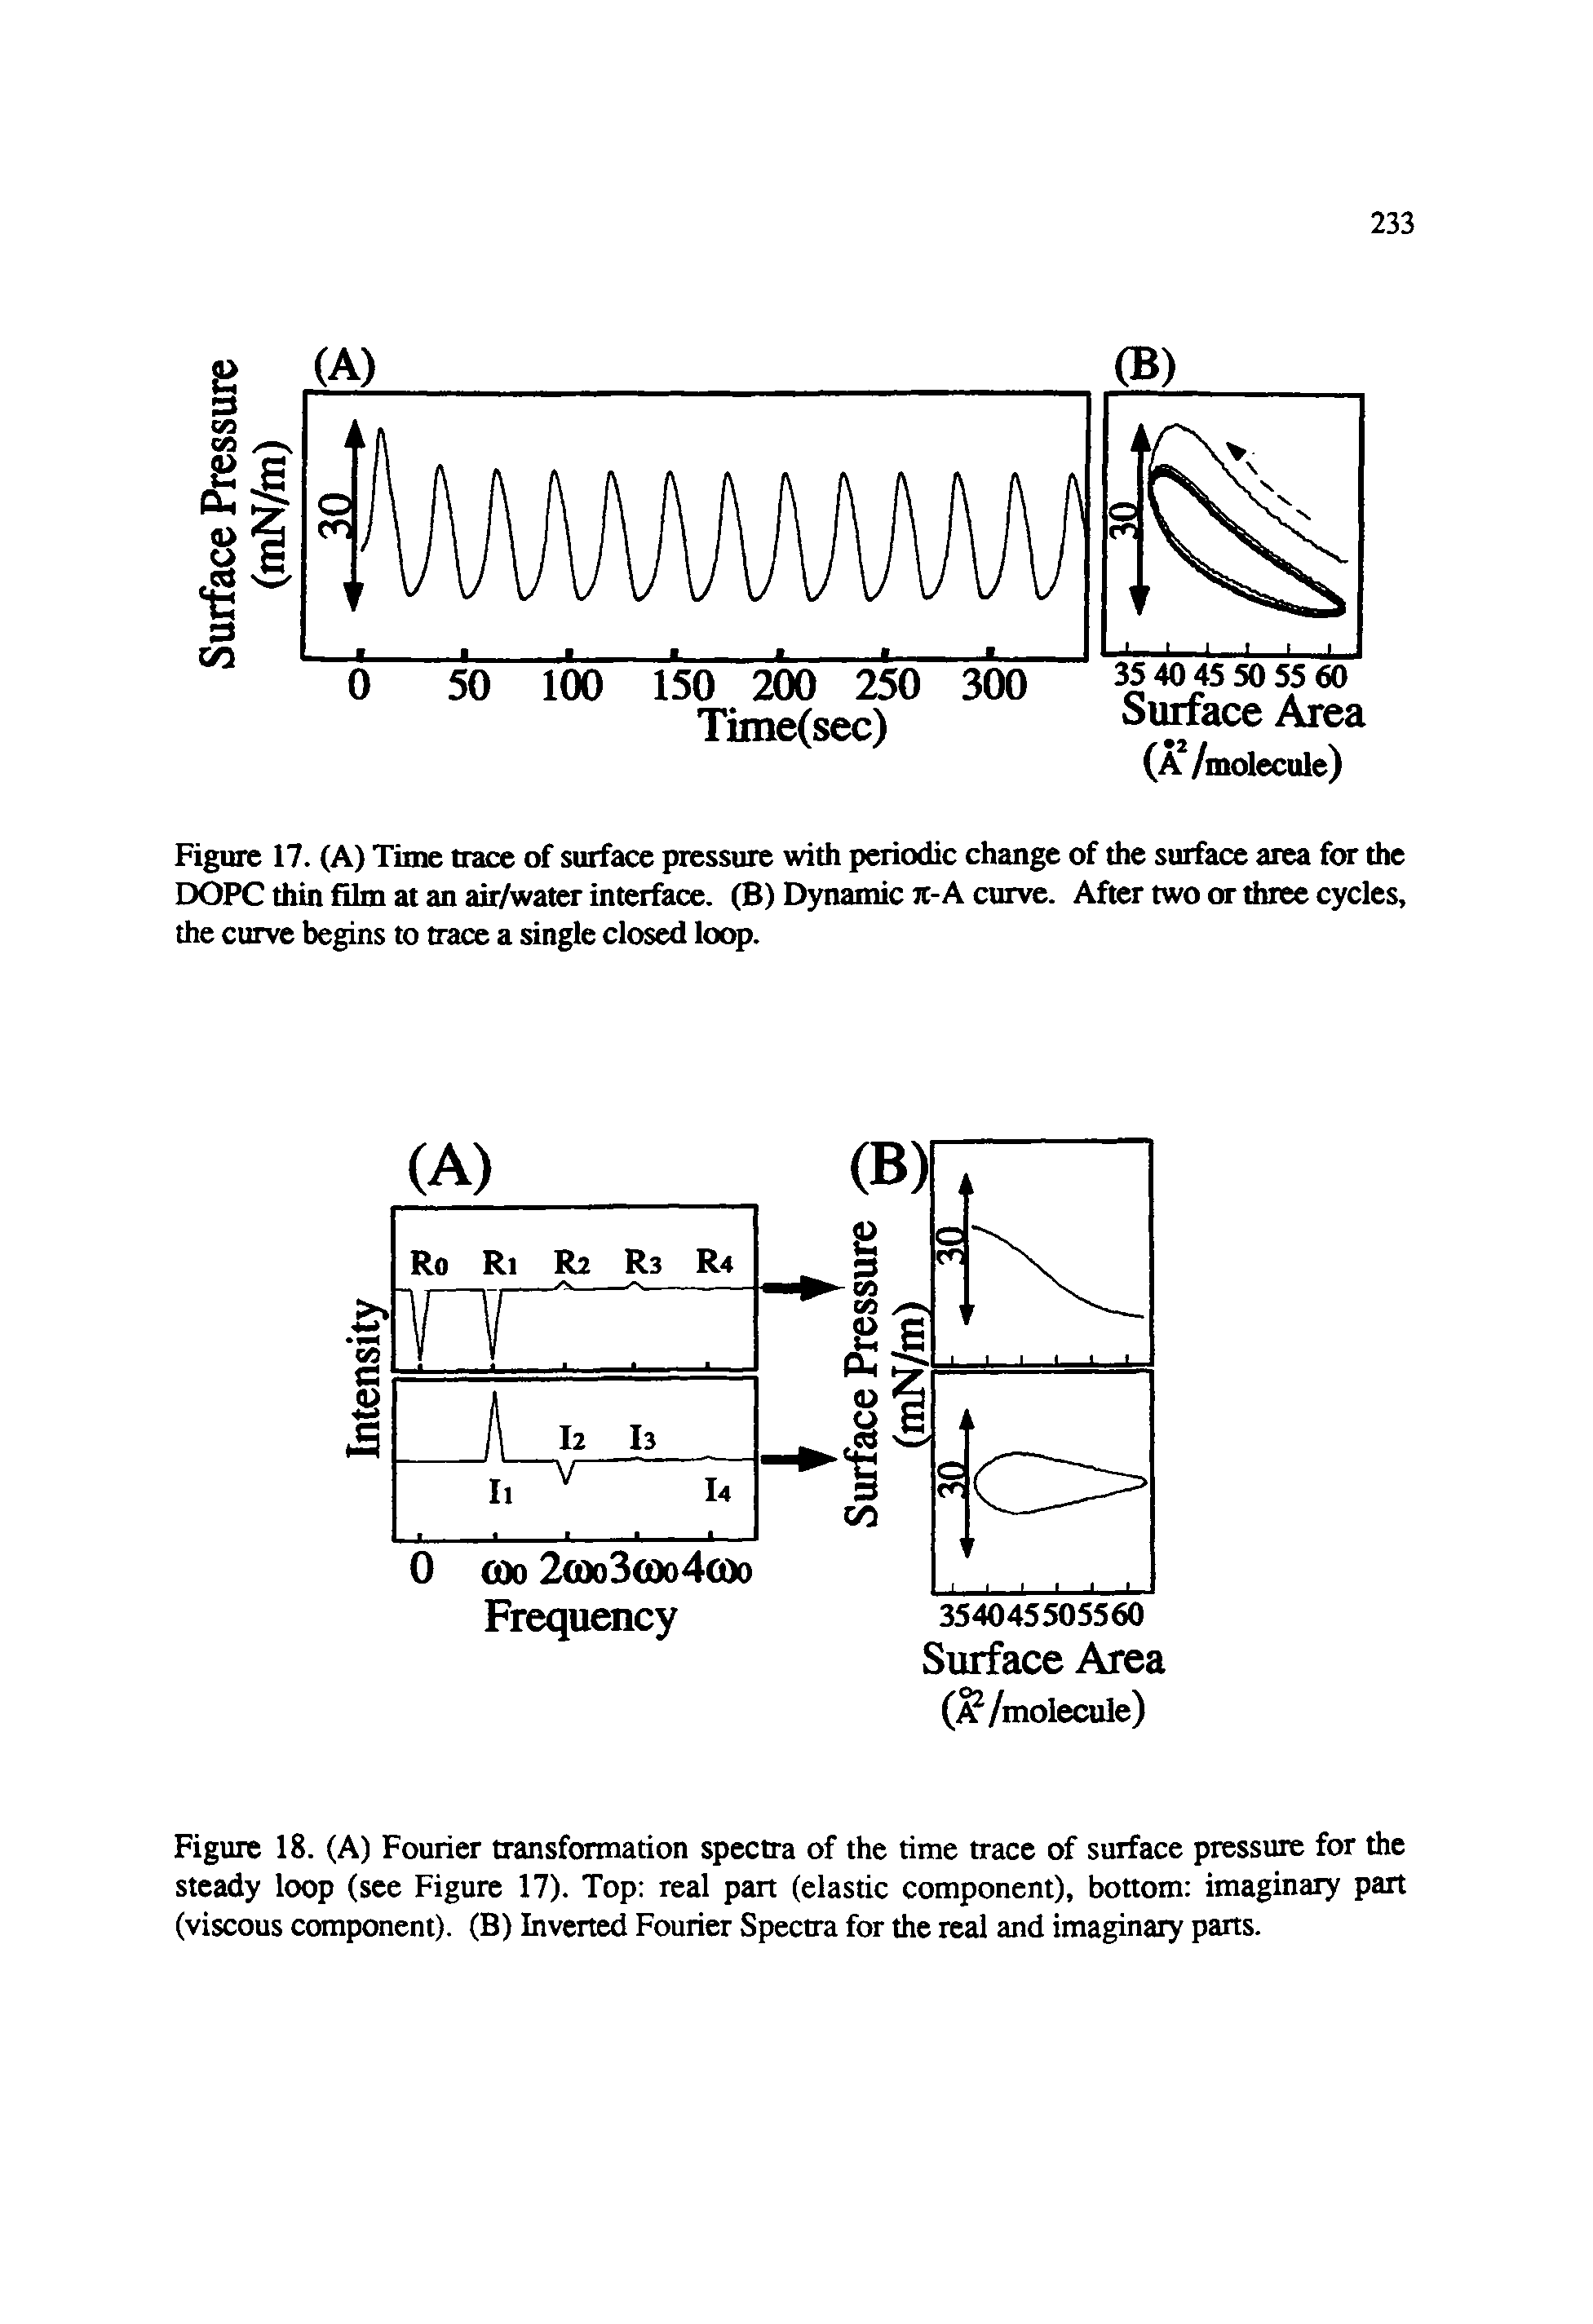 Figure 18. (A) Fourier transformation spectra of the time trace of surface pressure for the steady loop (see Figure 17). Top real part (elastic component), bottom imaginary part (viscous component). (B) Inverted Fourier Spectra for the real and imaginary parts.